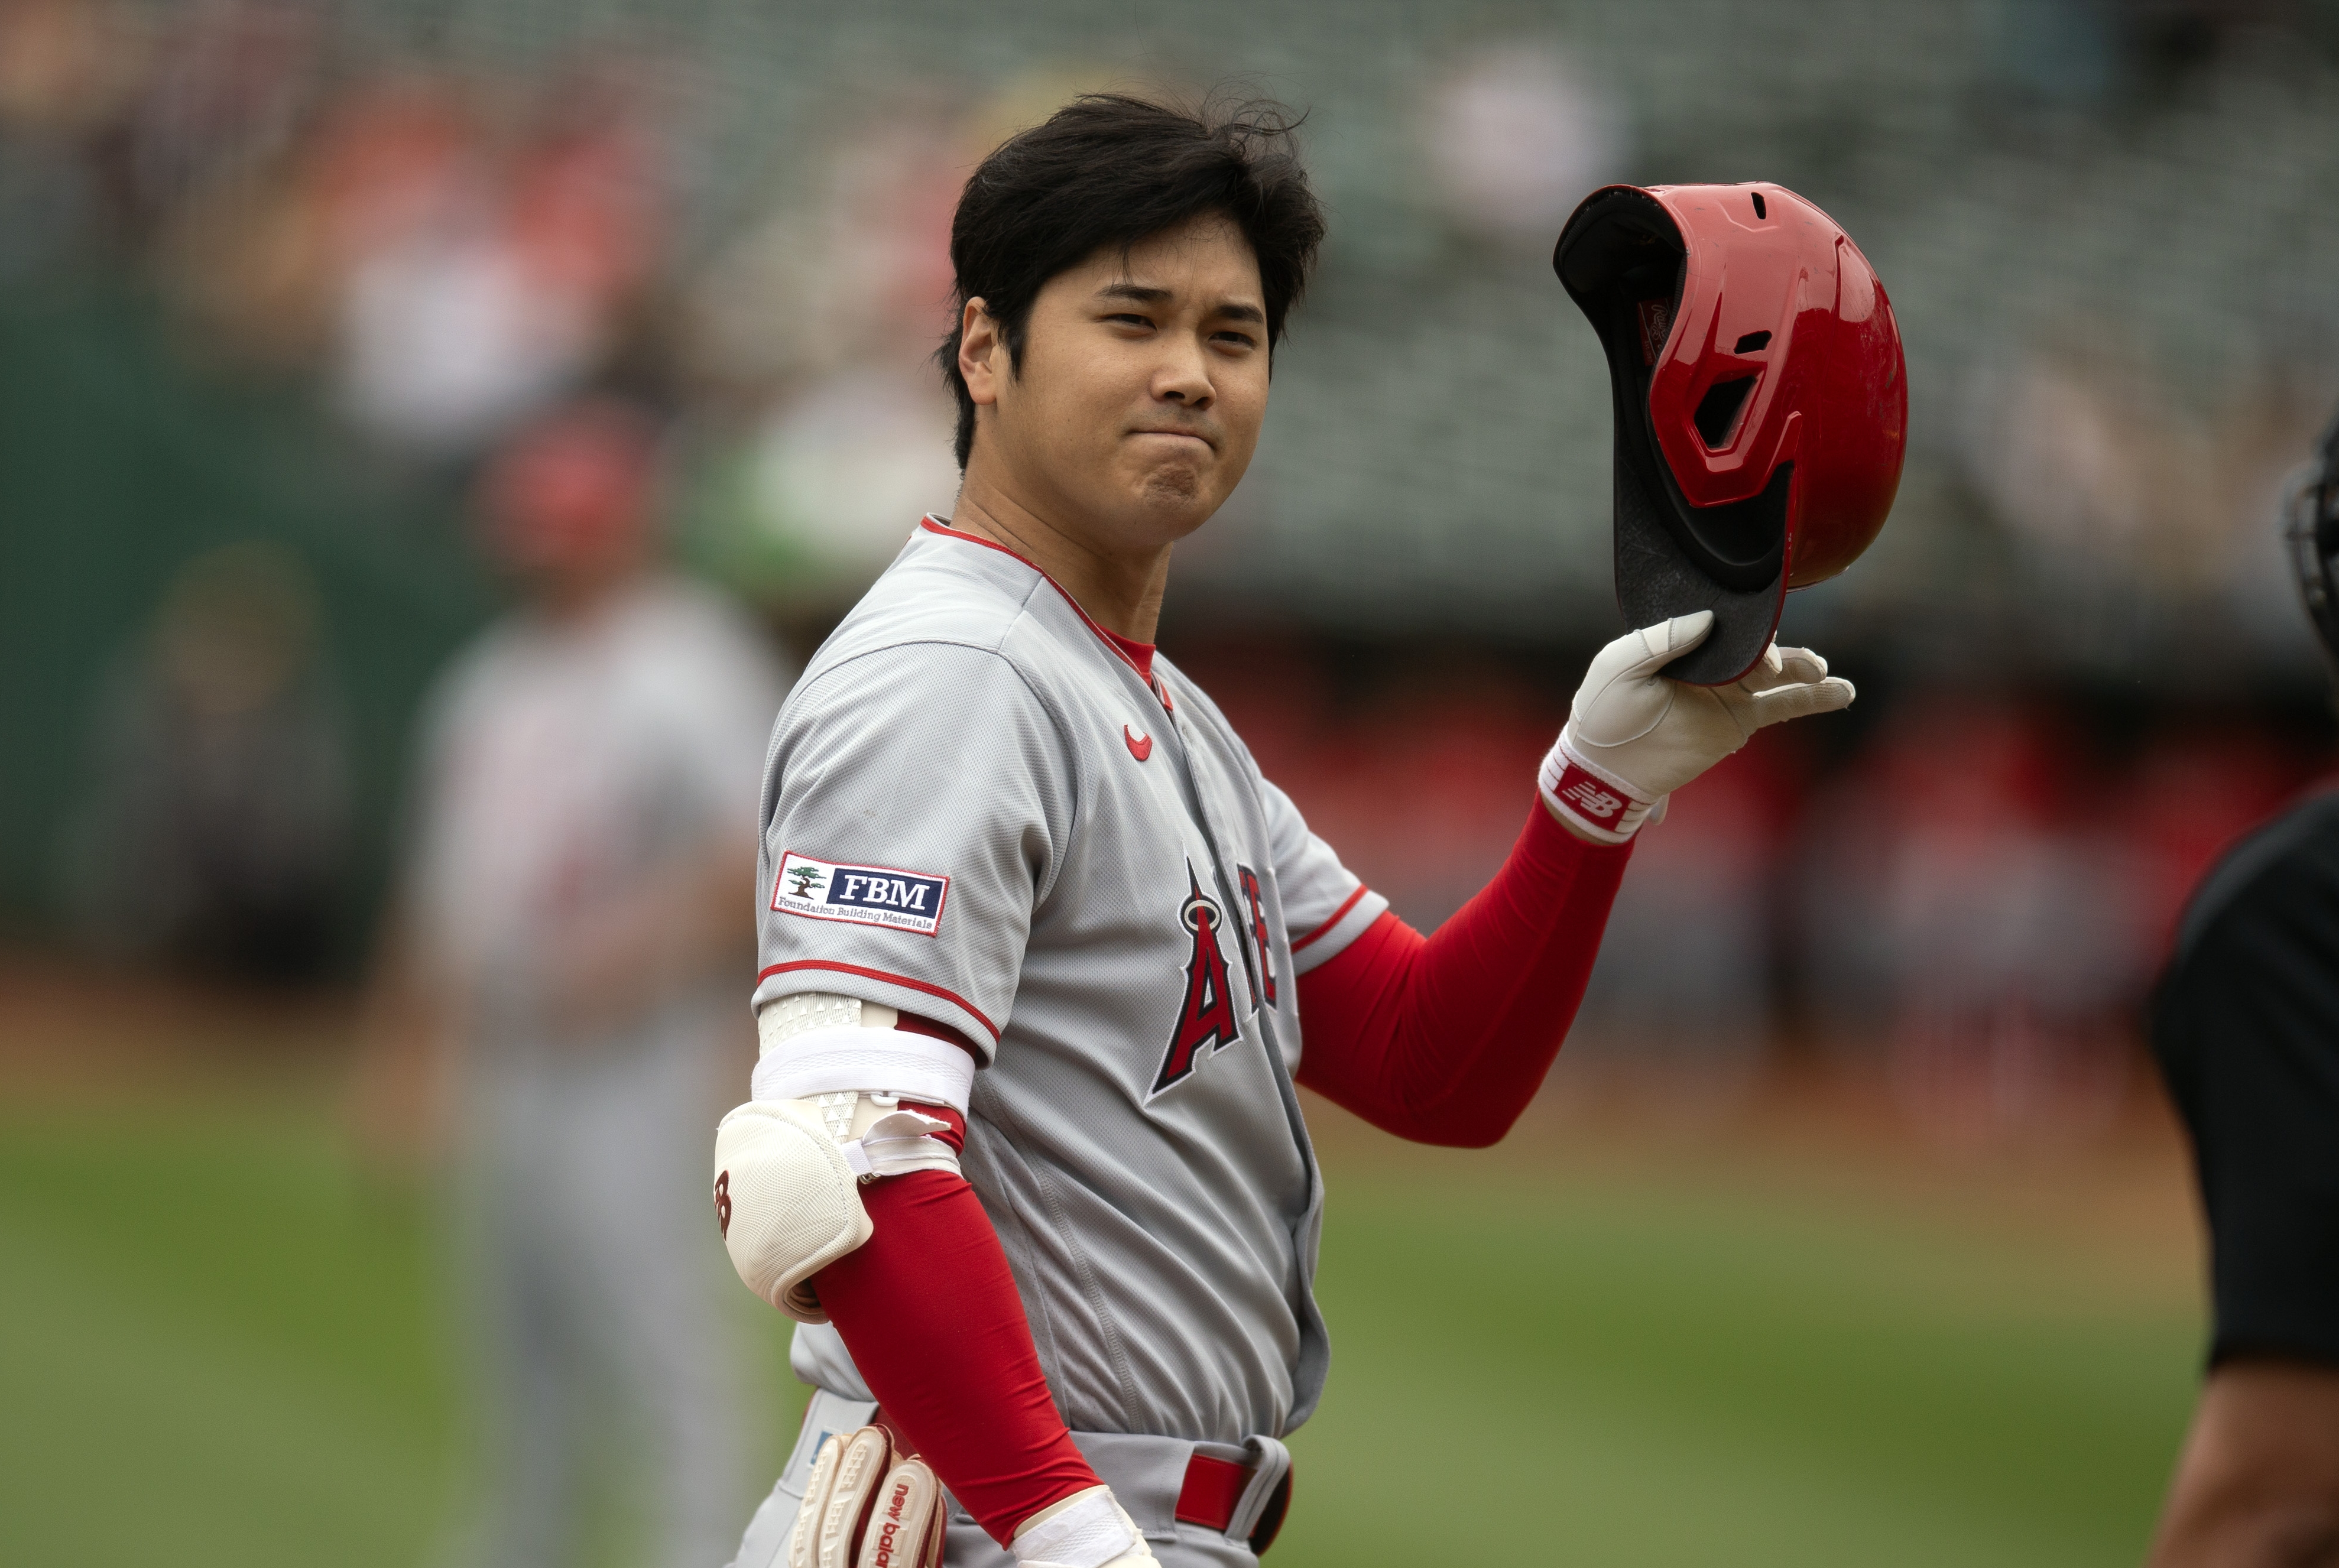 Yankees reportedly looked into trade for Shohei Ohtani